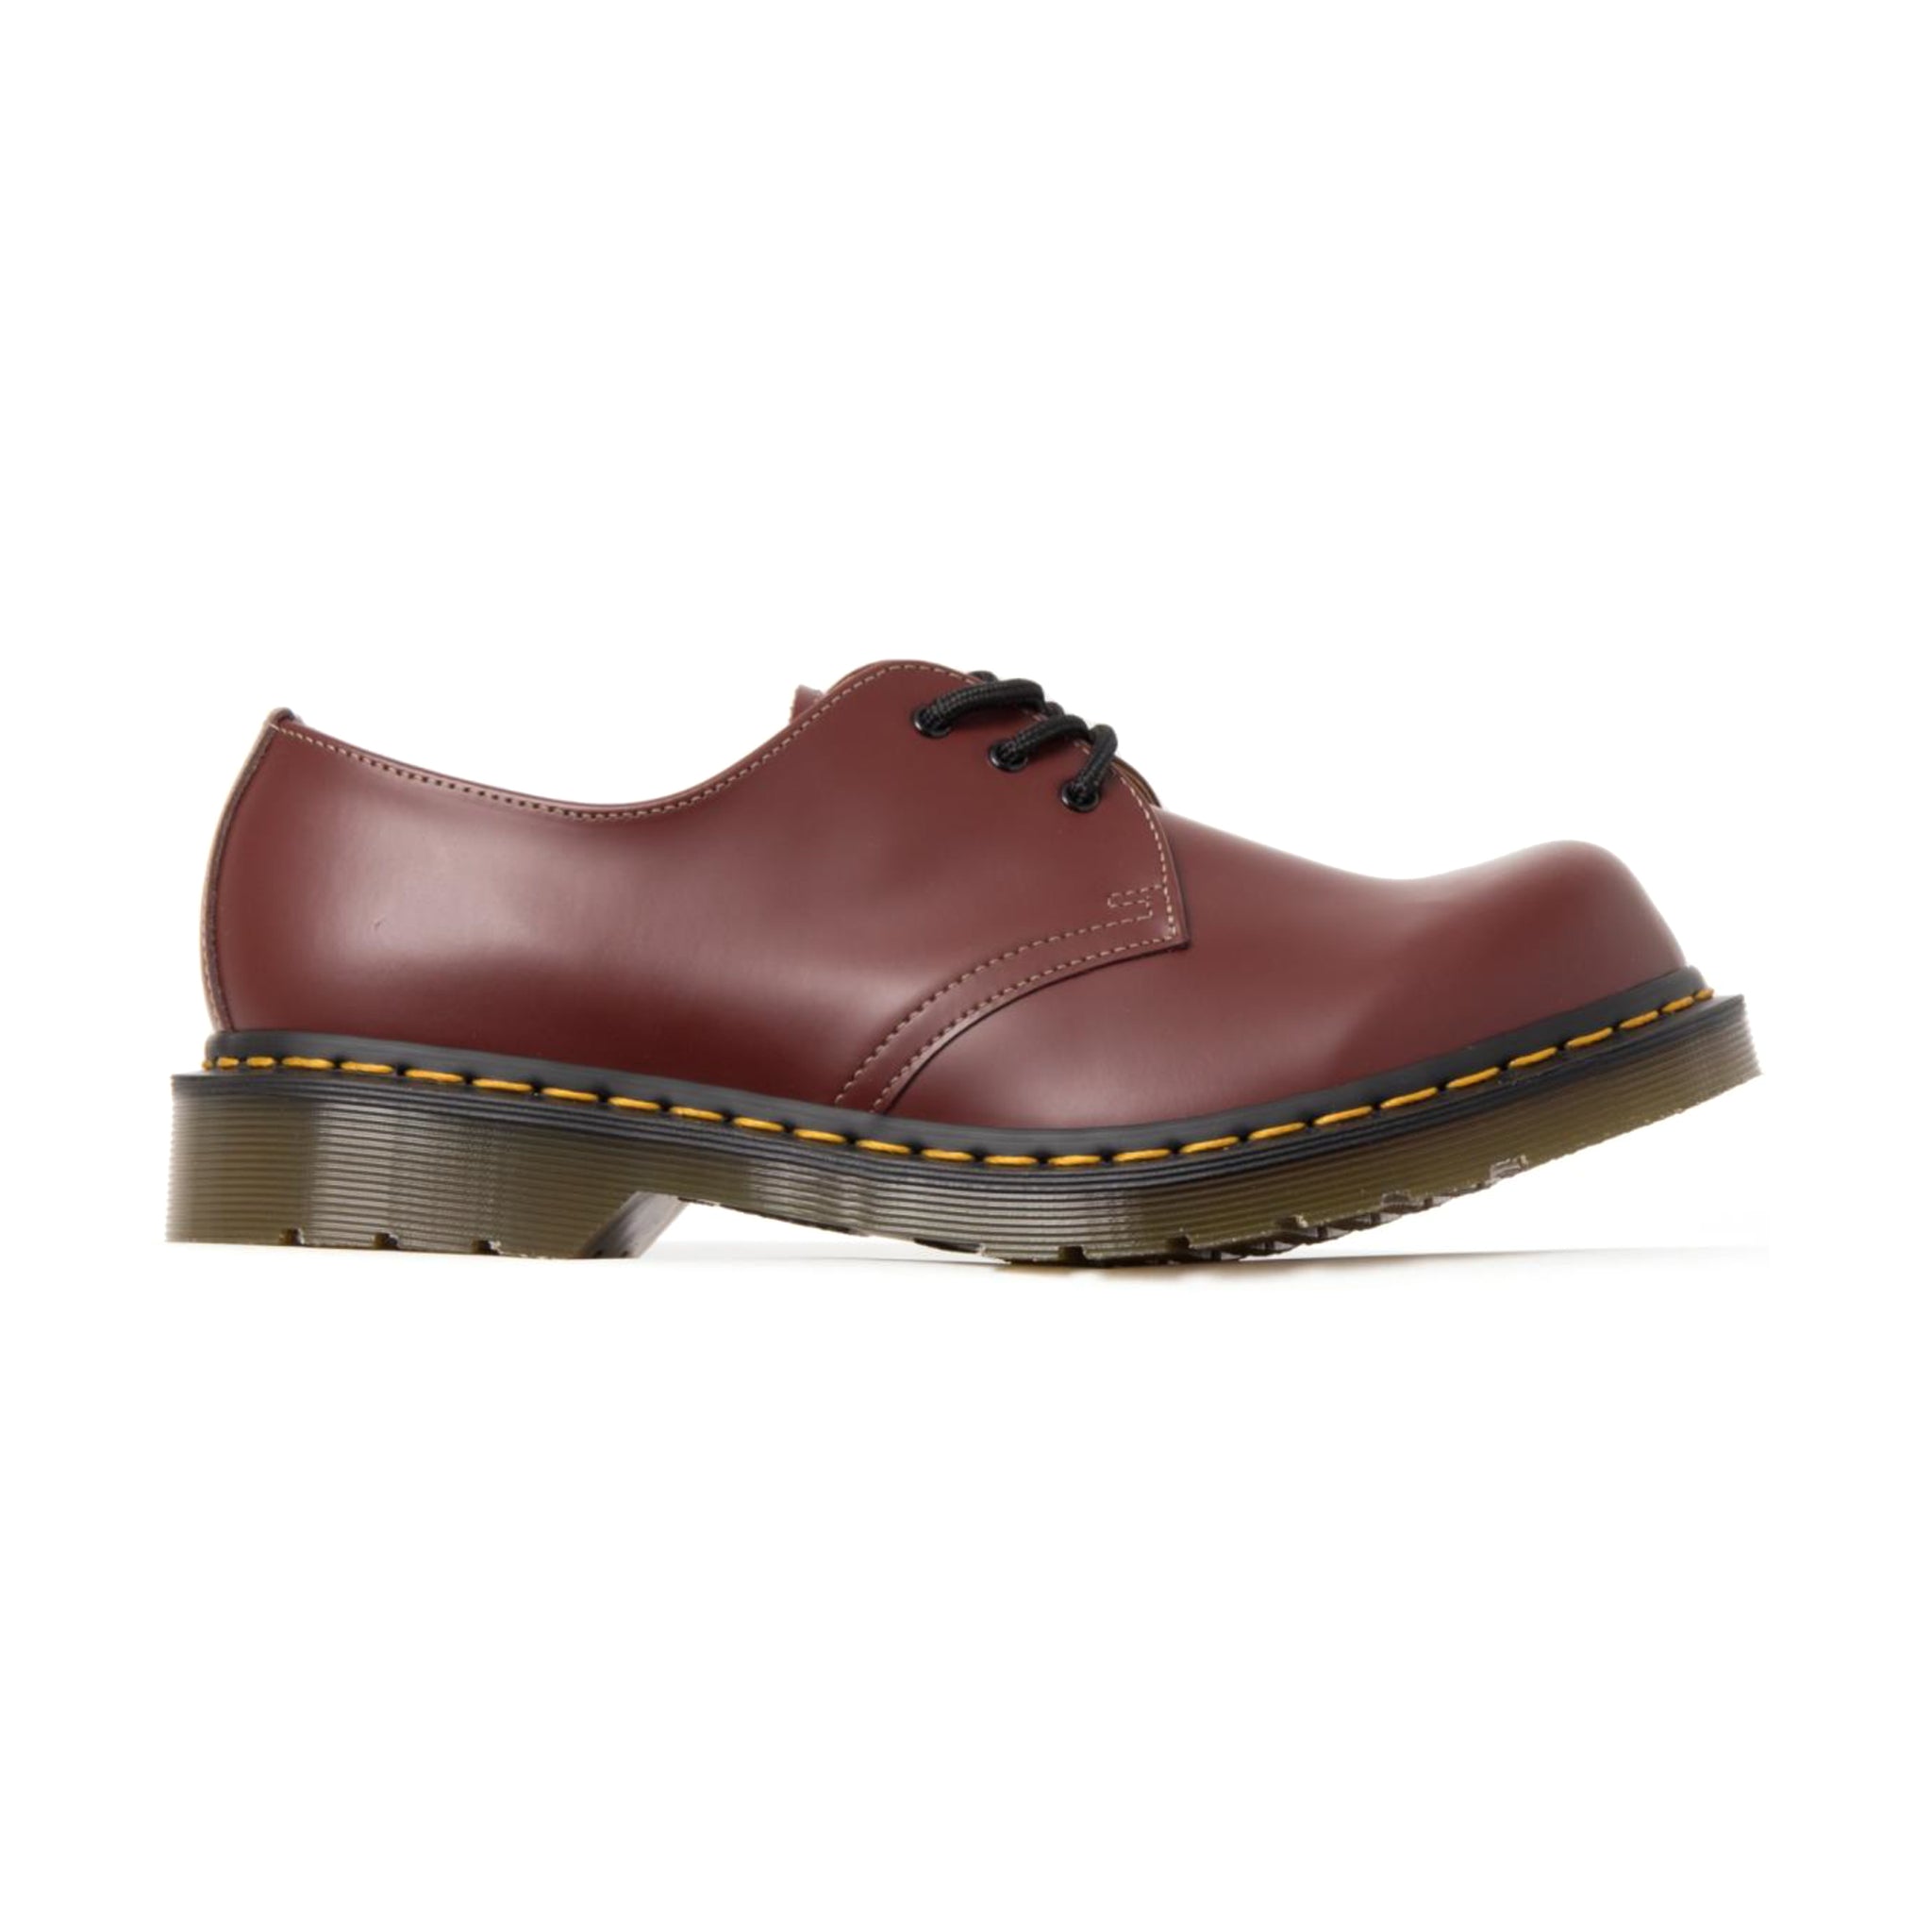 HDTB x Dr Martens Leather Lace Up Cherry Red